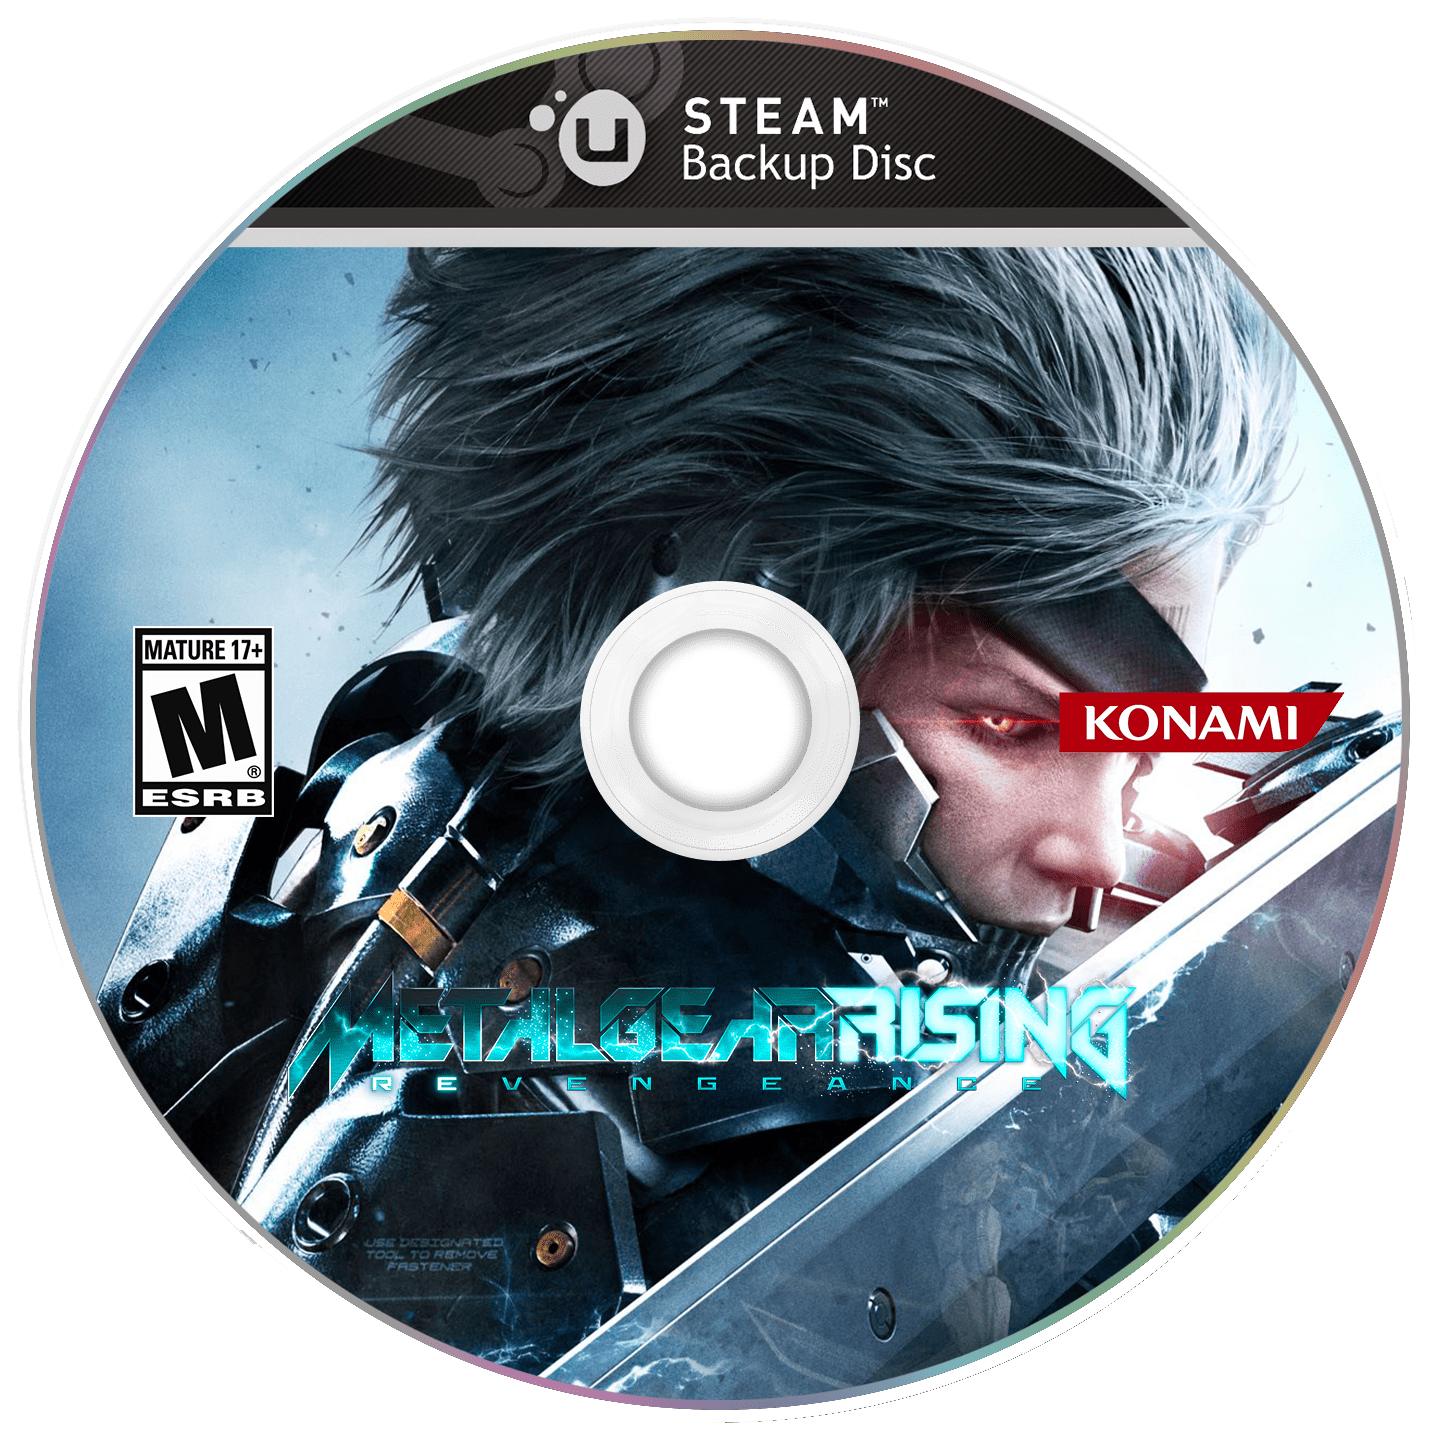 Metal Gear Rising: Revengeance PlayStation 4 Box Art Cover by james007